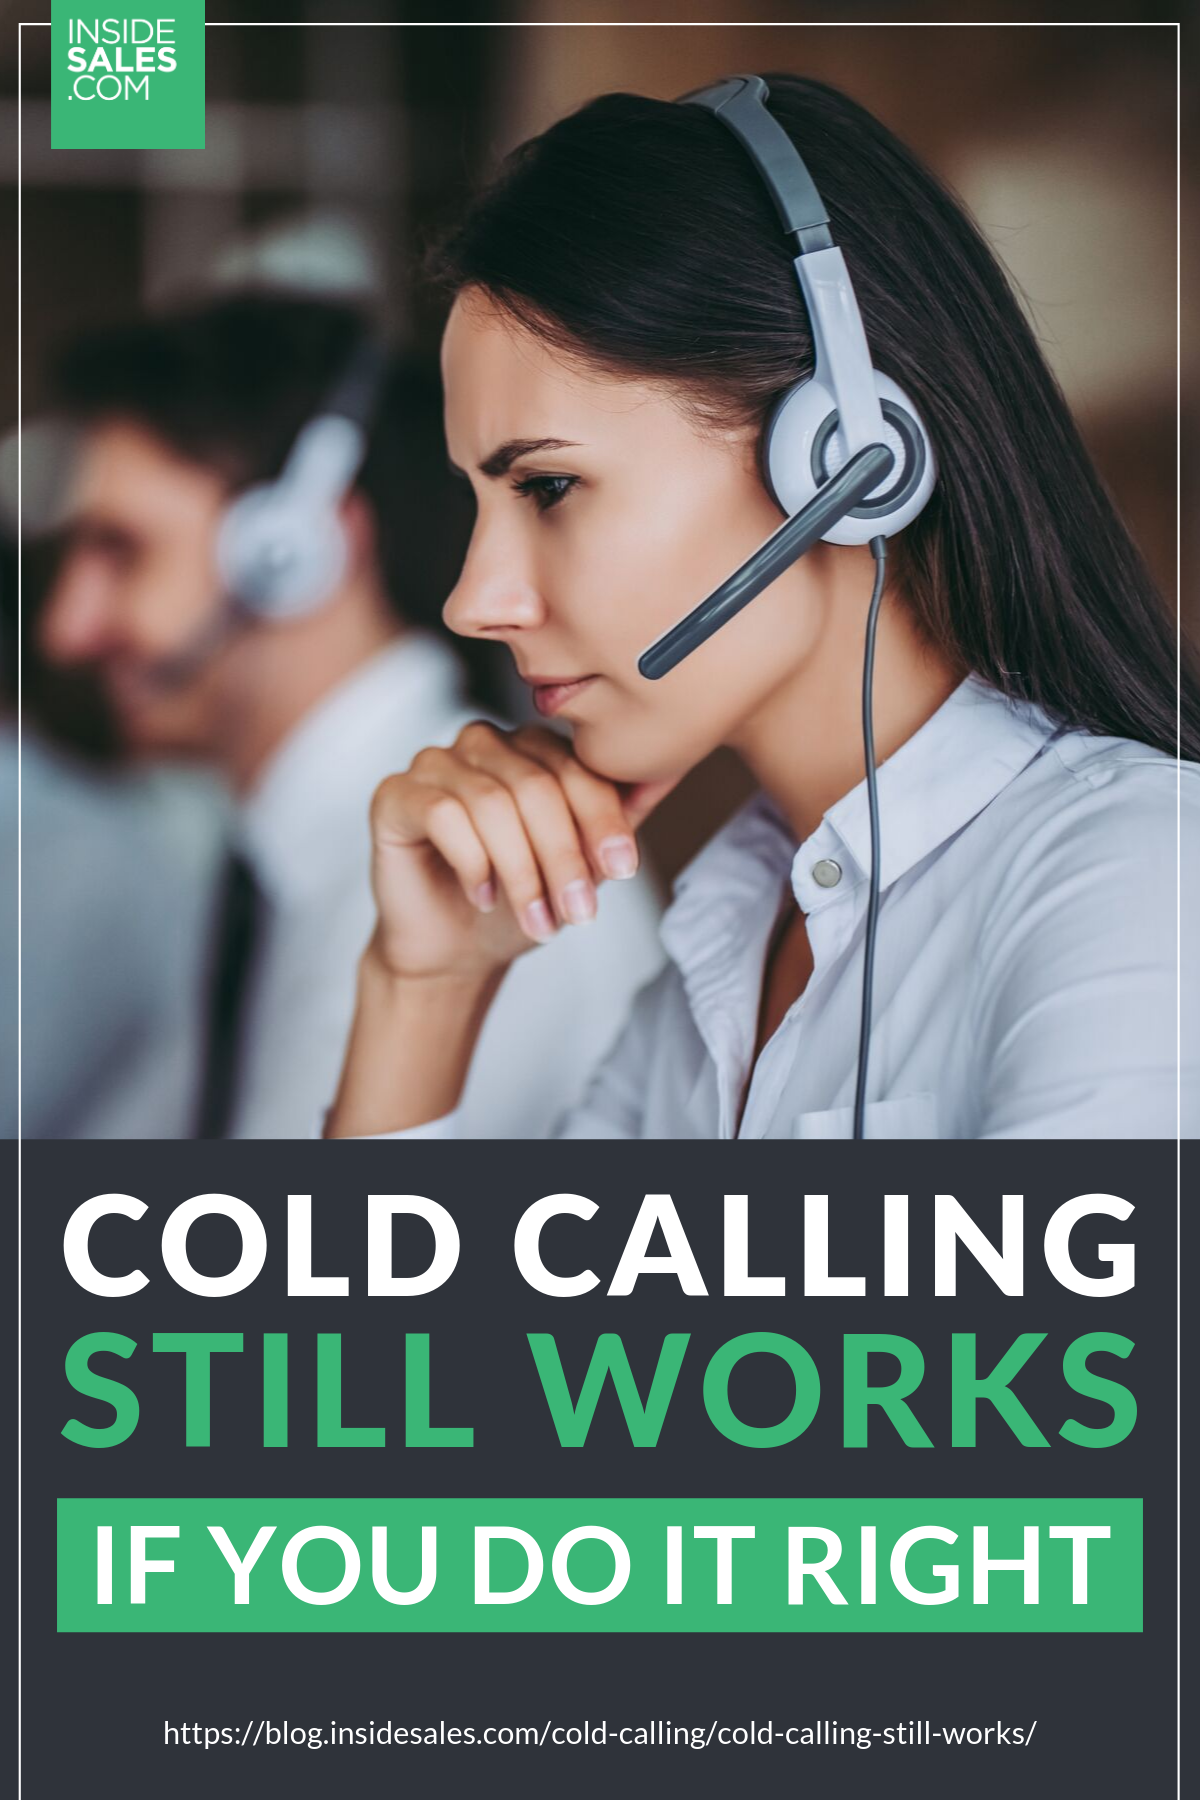 Cold Calling Still Works – If You Do It Right https://resources.insidesales.com/blog/cold-calling/cold-calling-still-works/